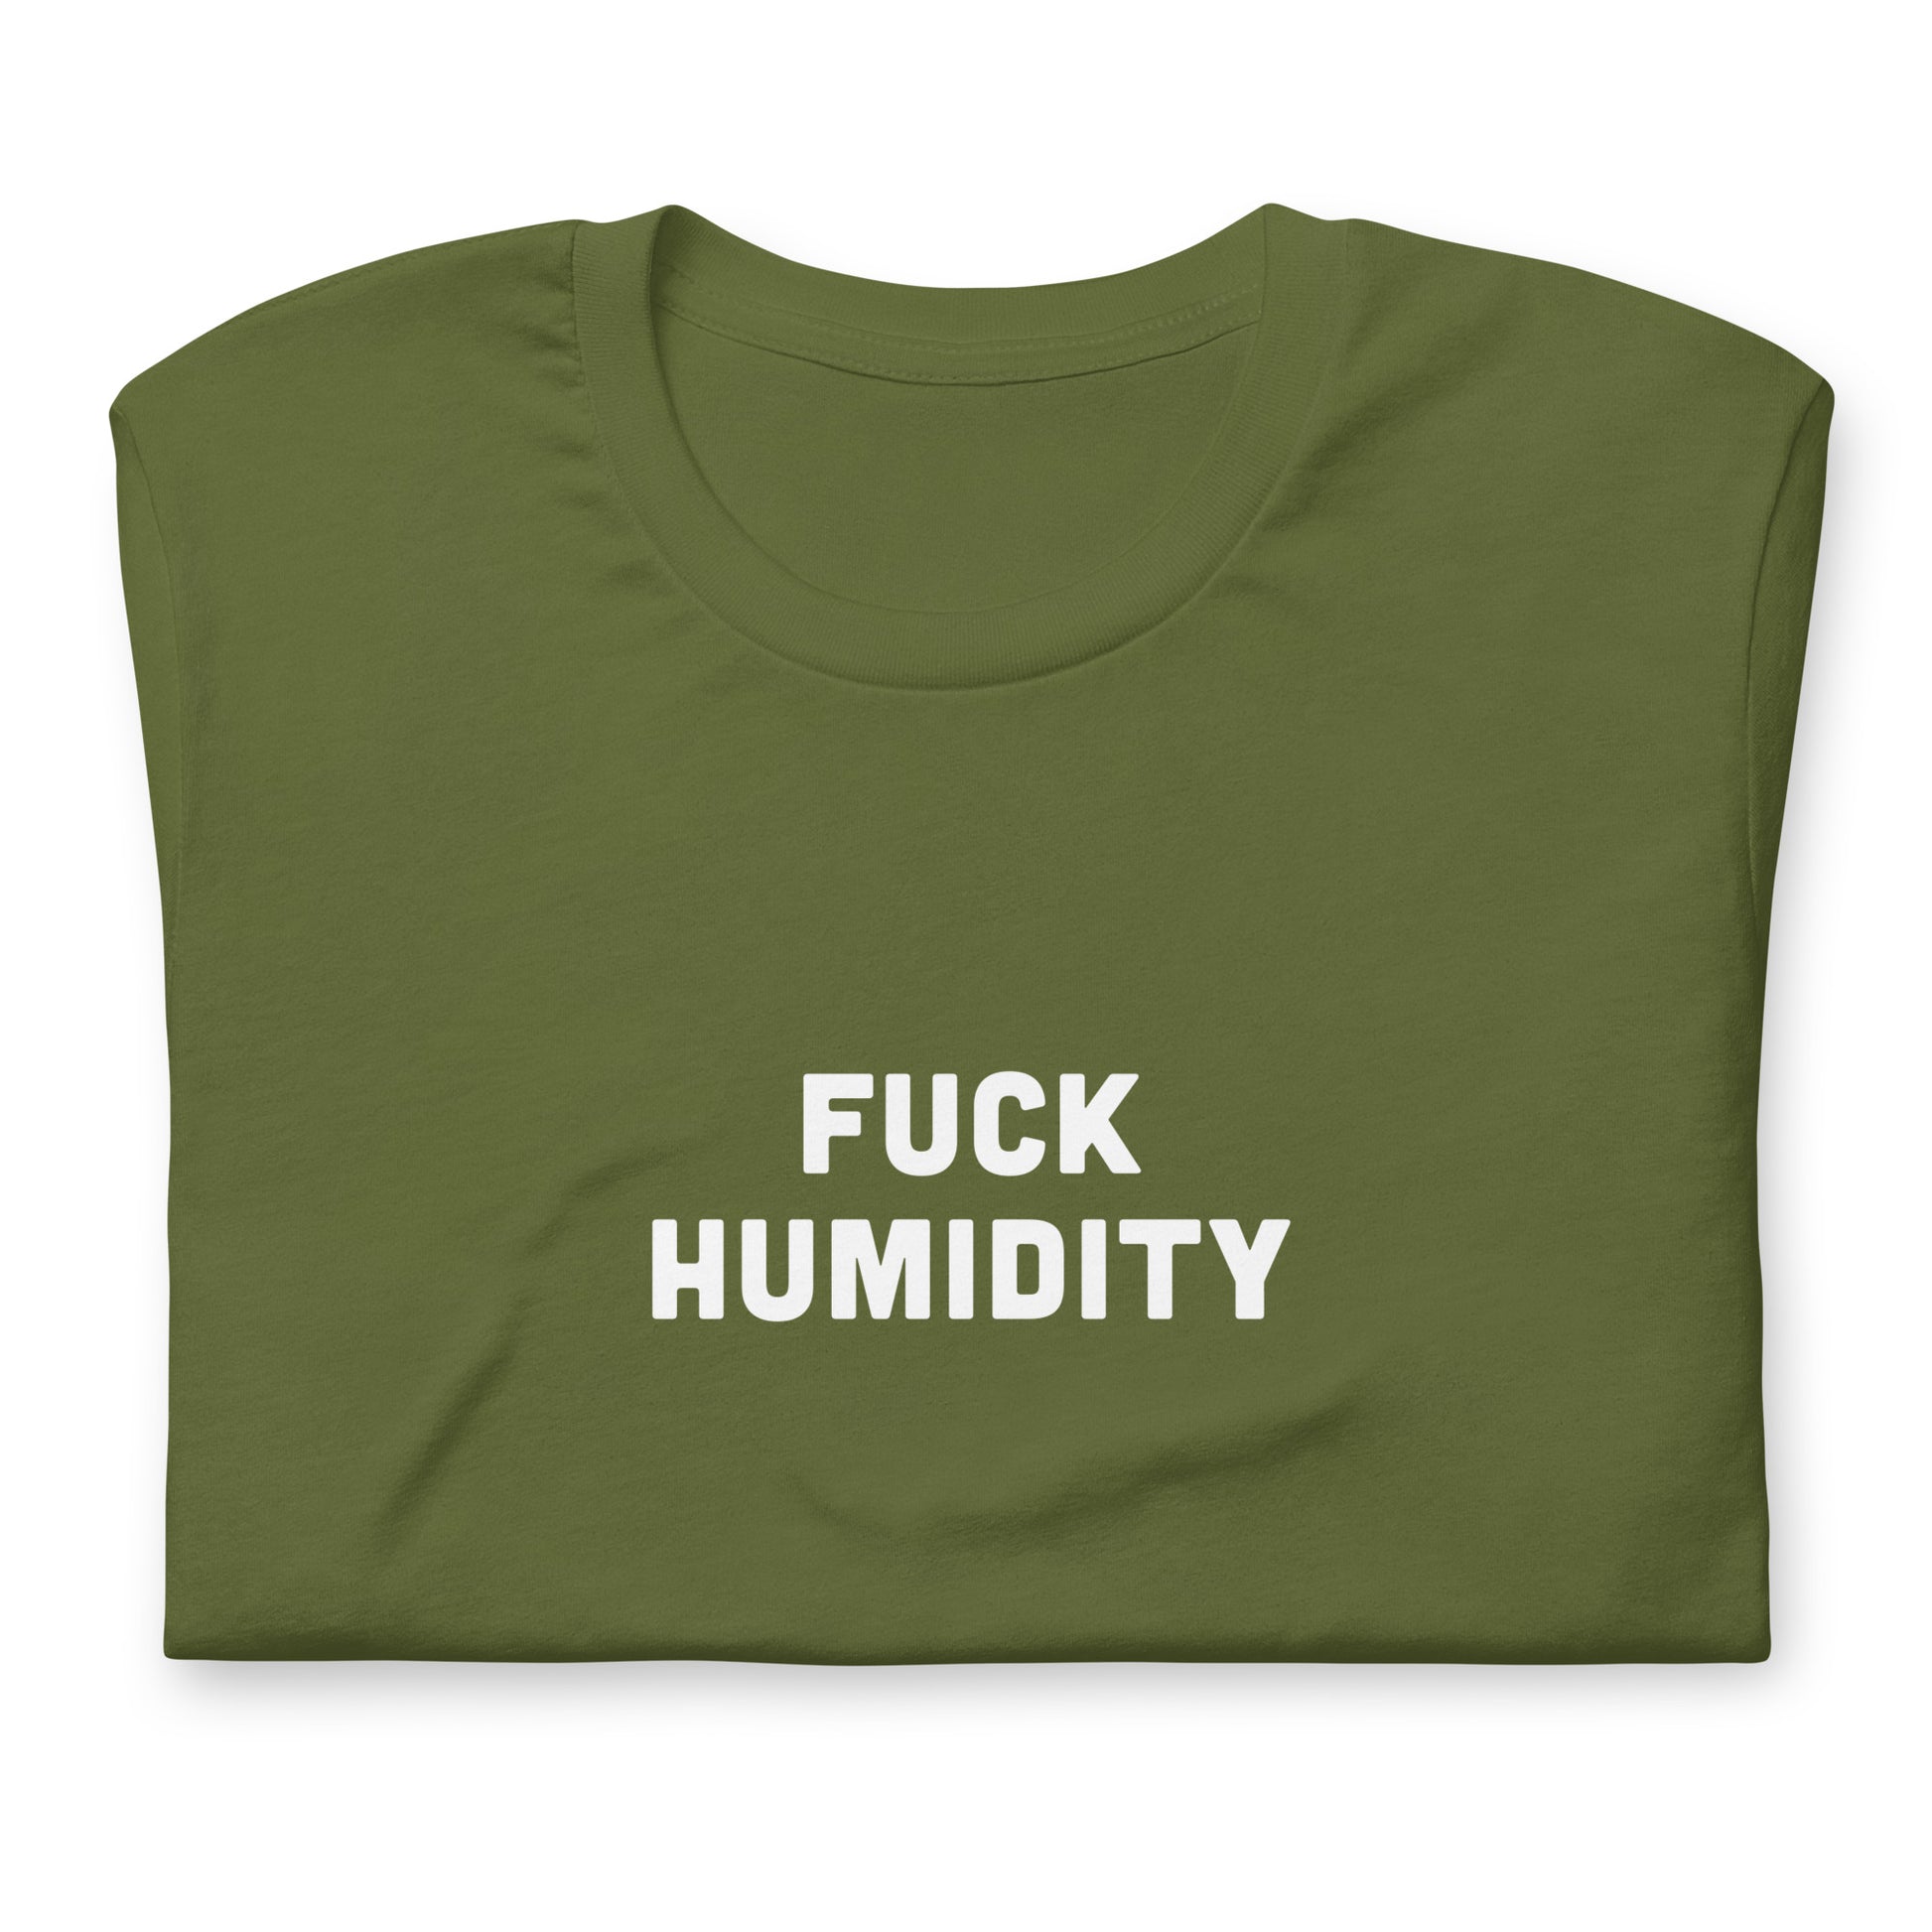 Fuck Humidity T-Shirt Size S Color Navy